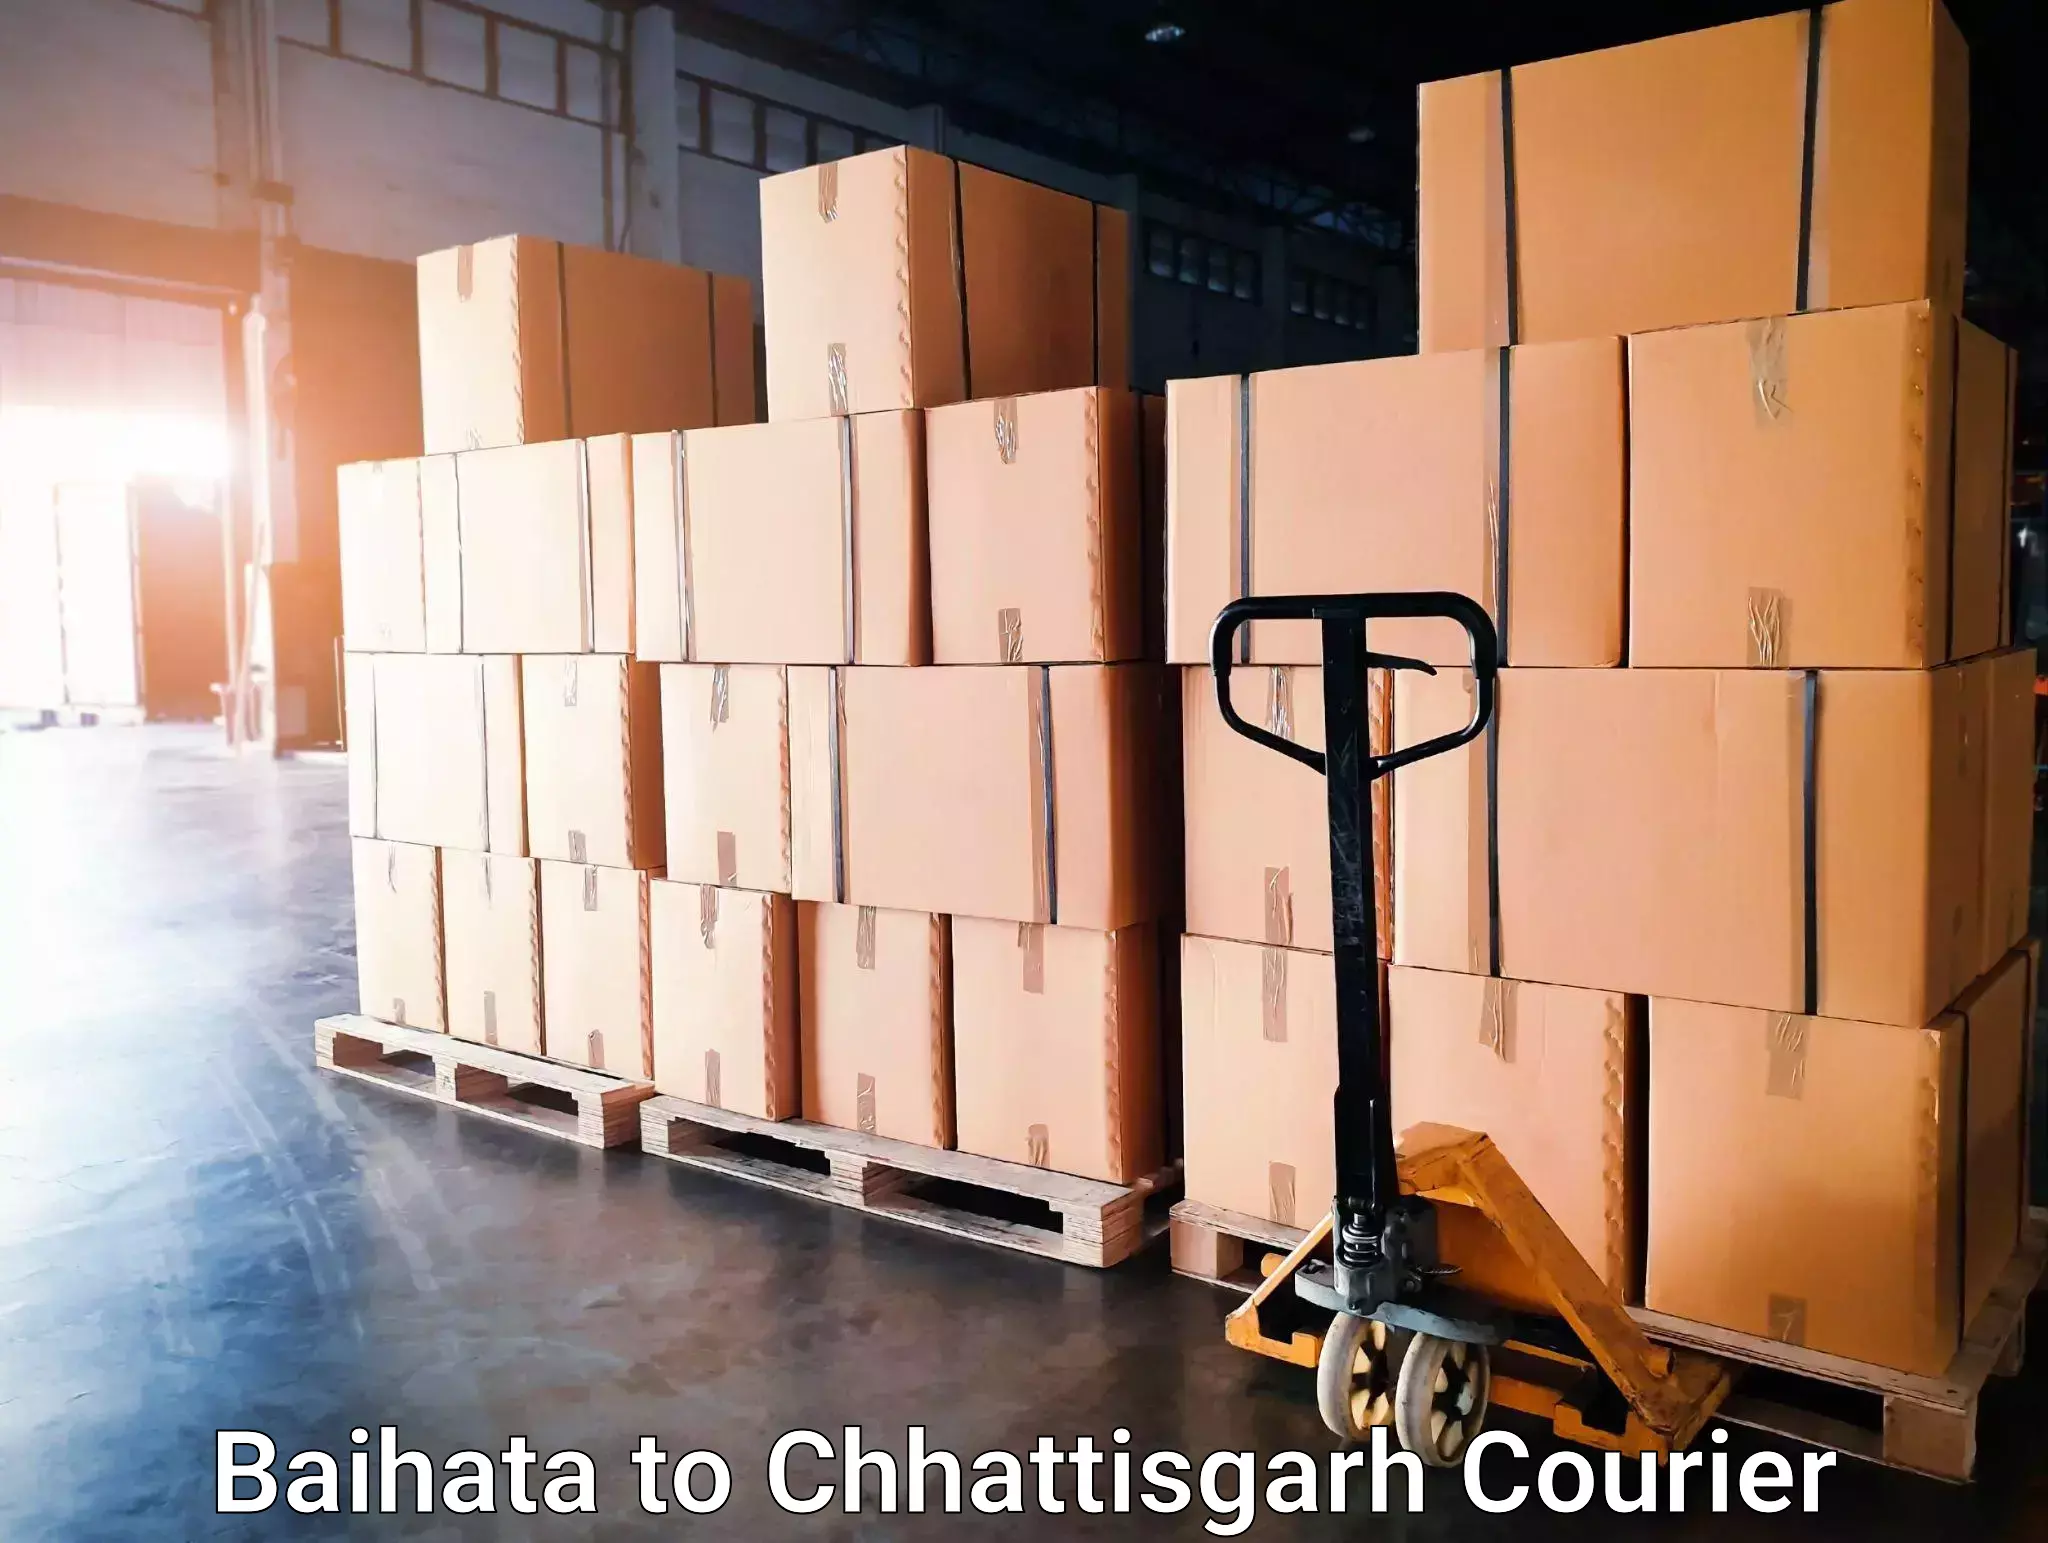 Courier service booking in Baihata to Bhatapara